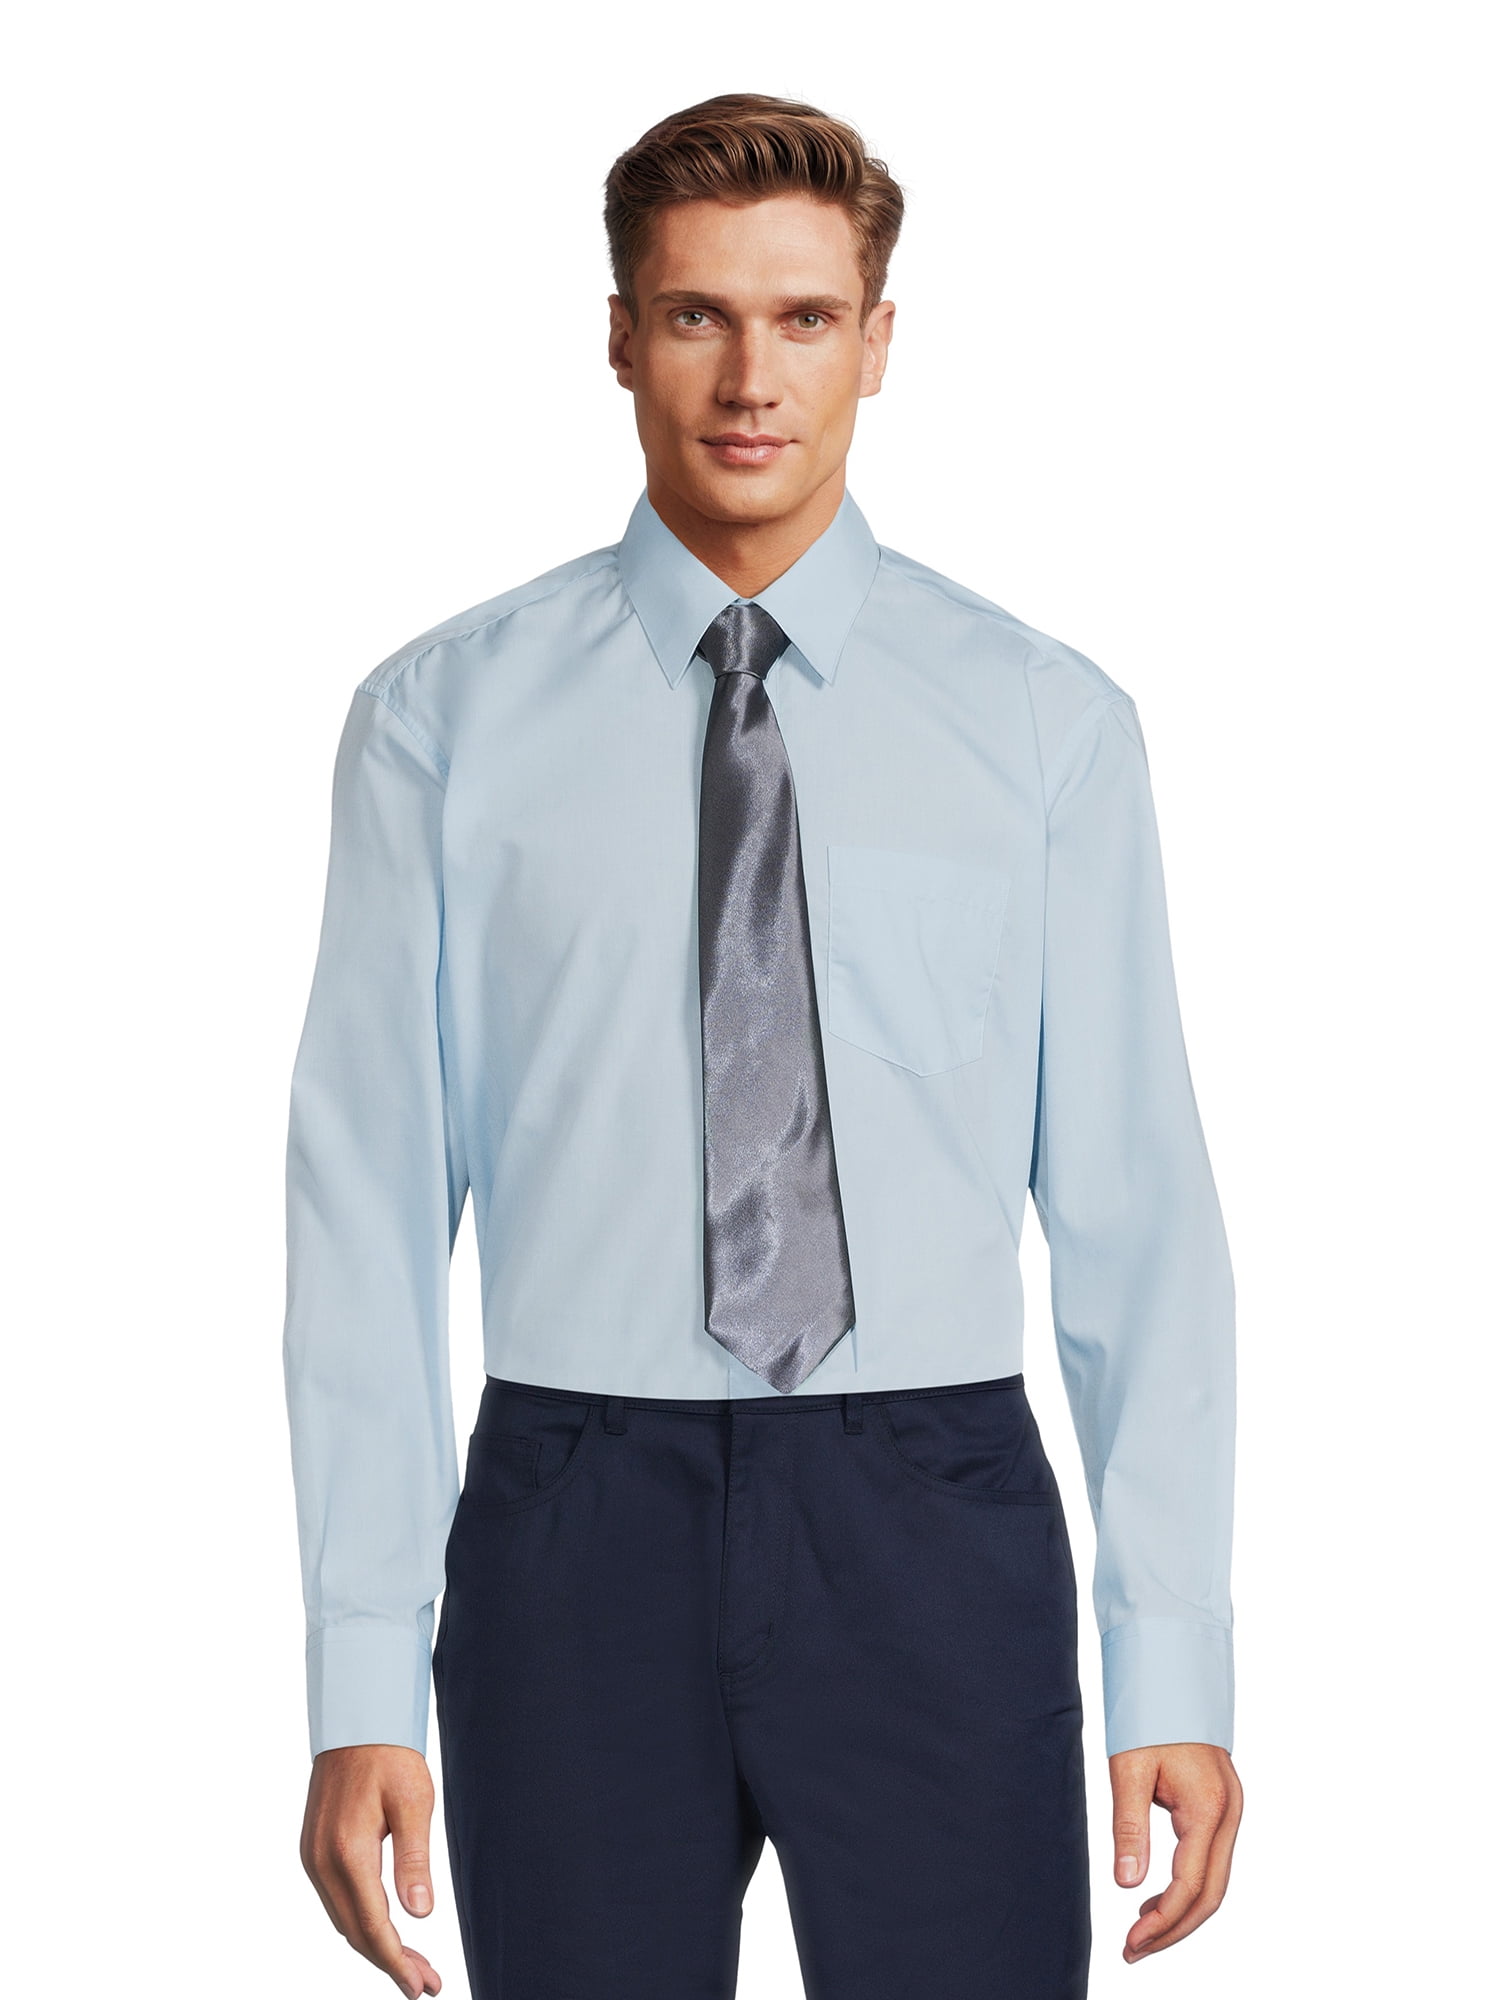 dress shirt with a tie